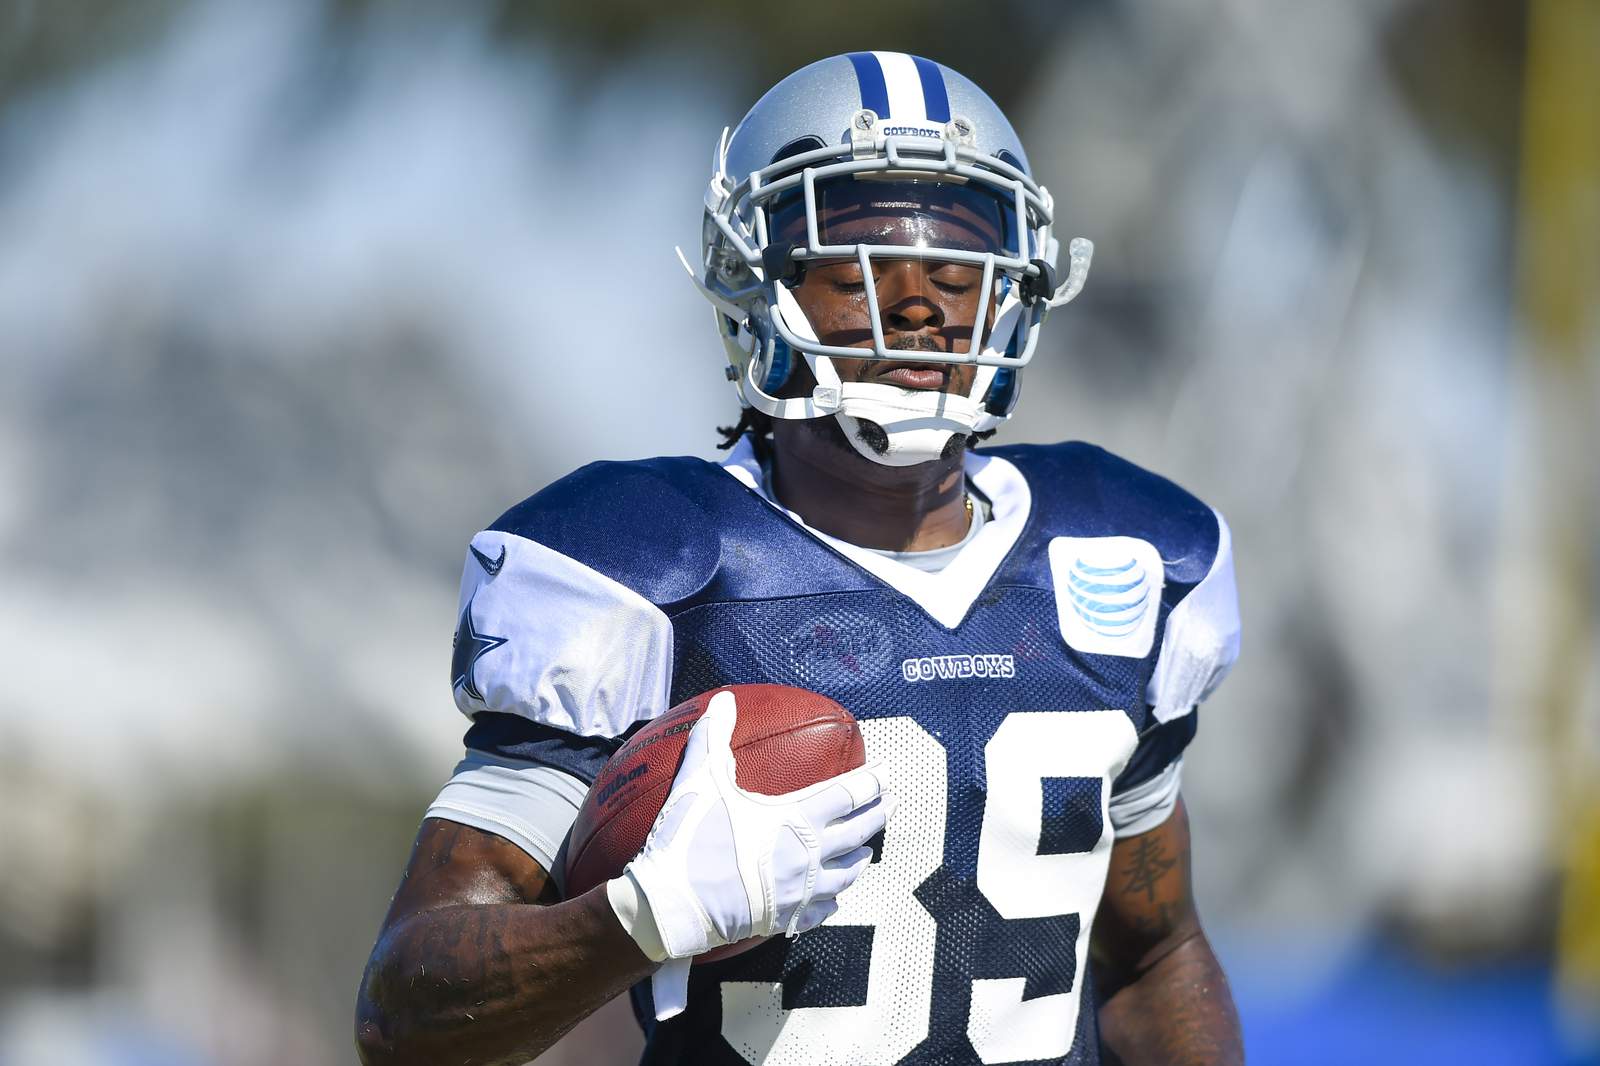 Veteran DB Carr returns to Cowboys on their practice squad